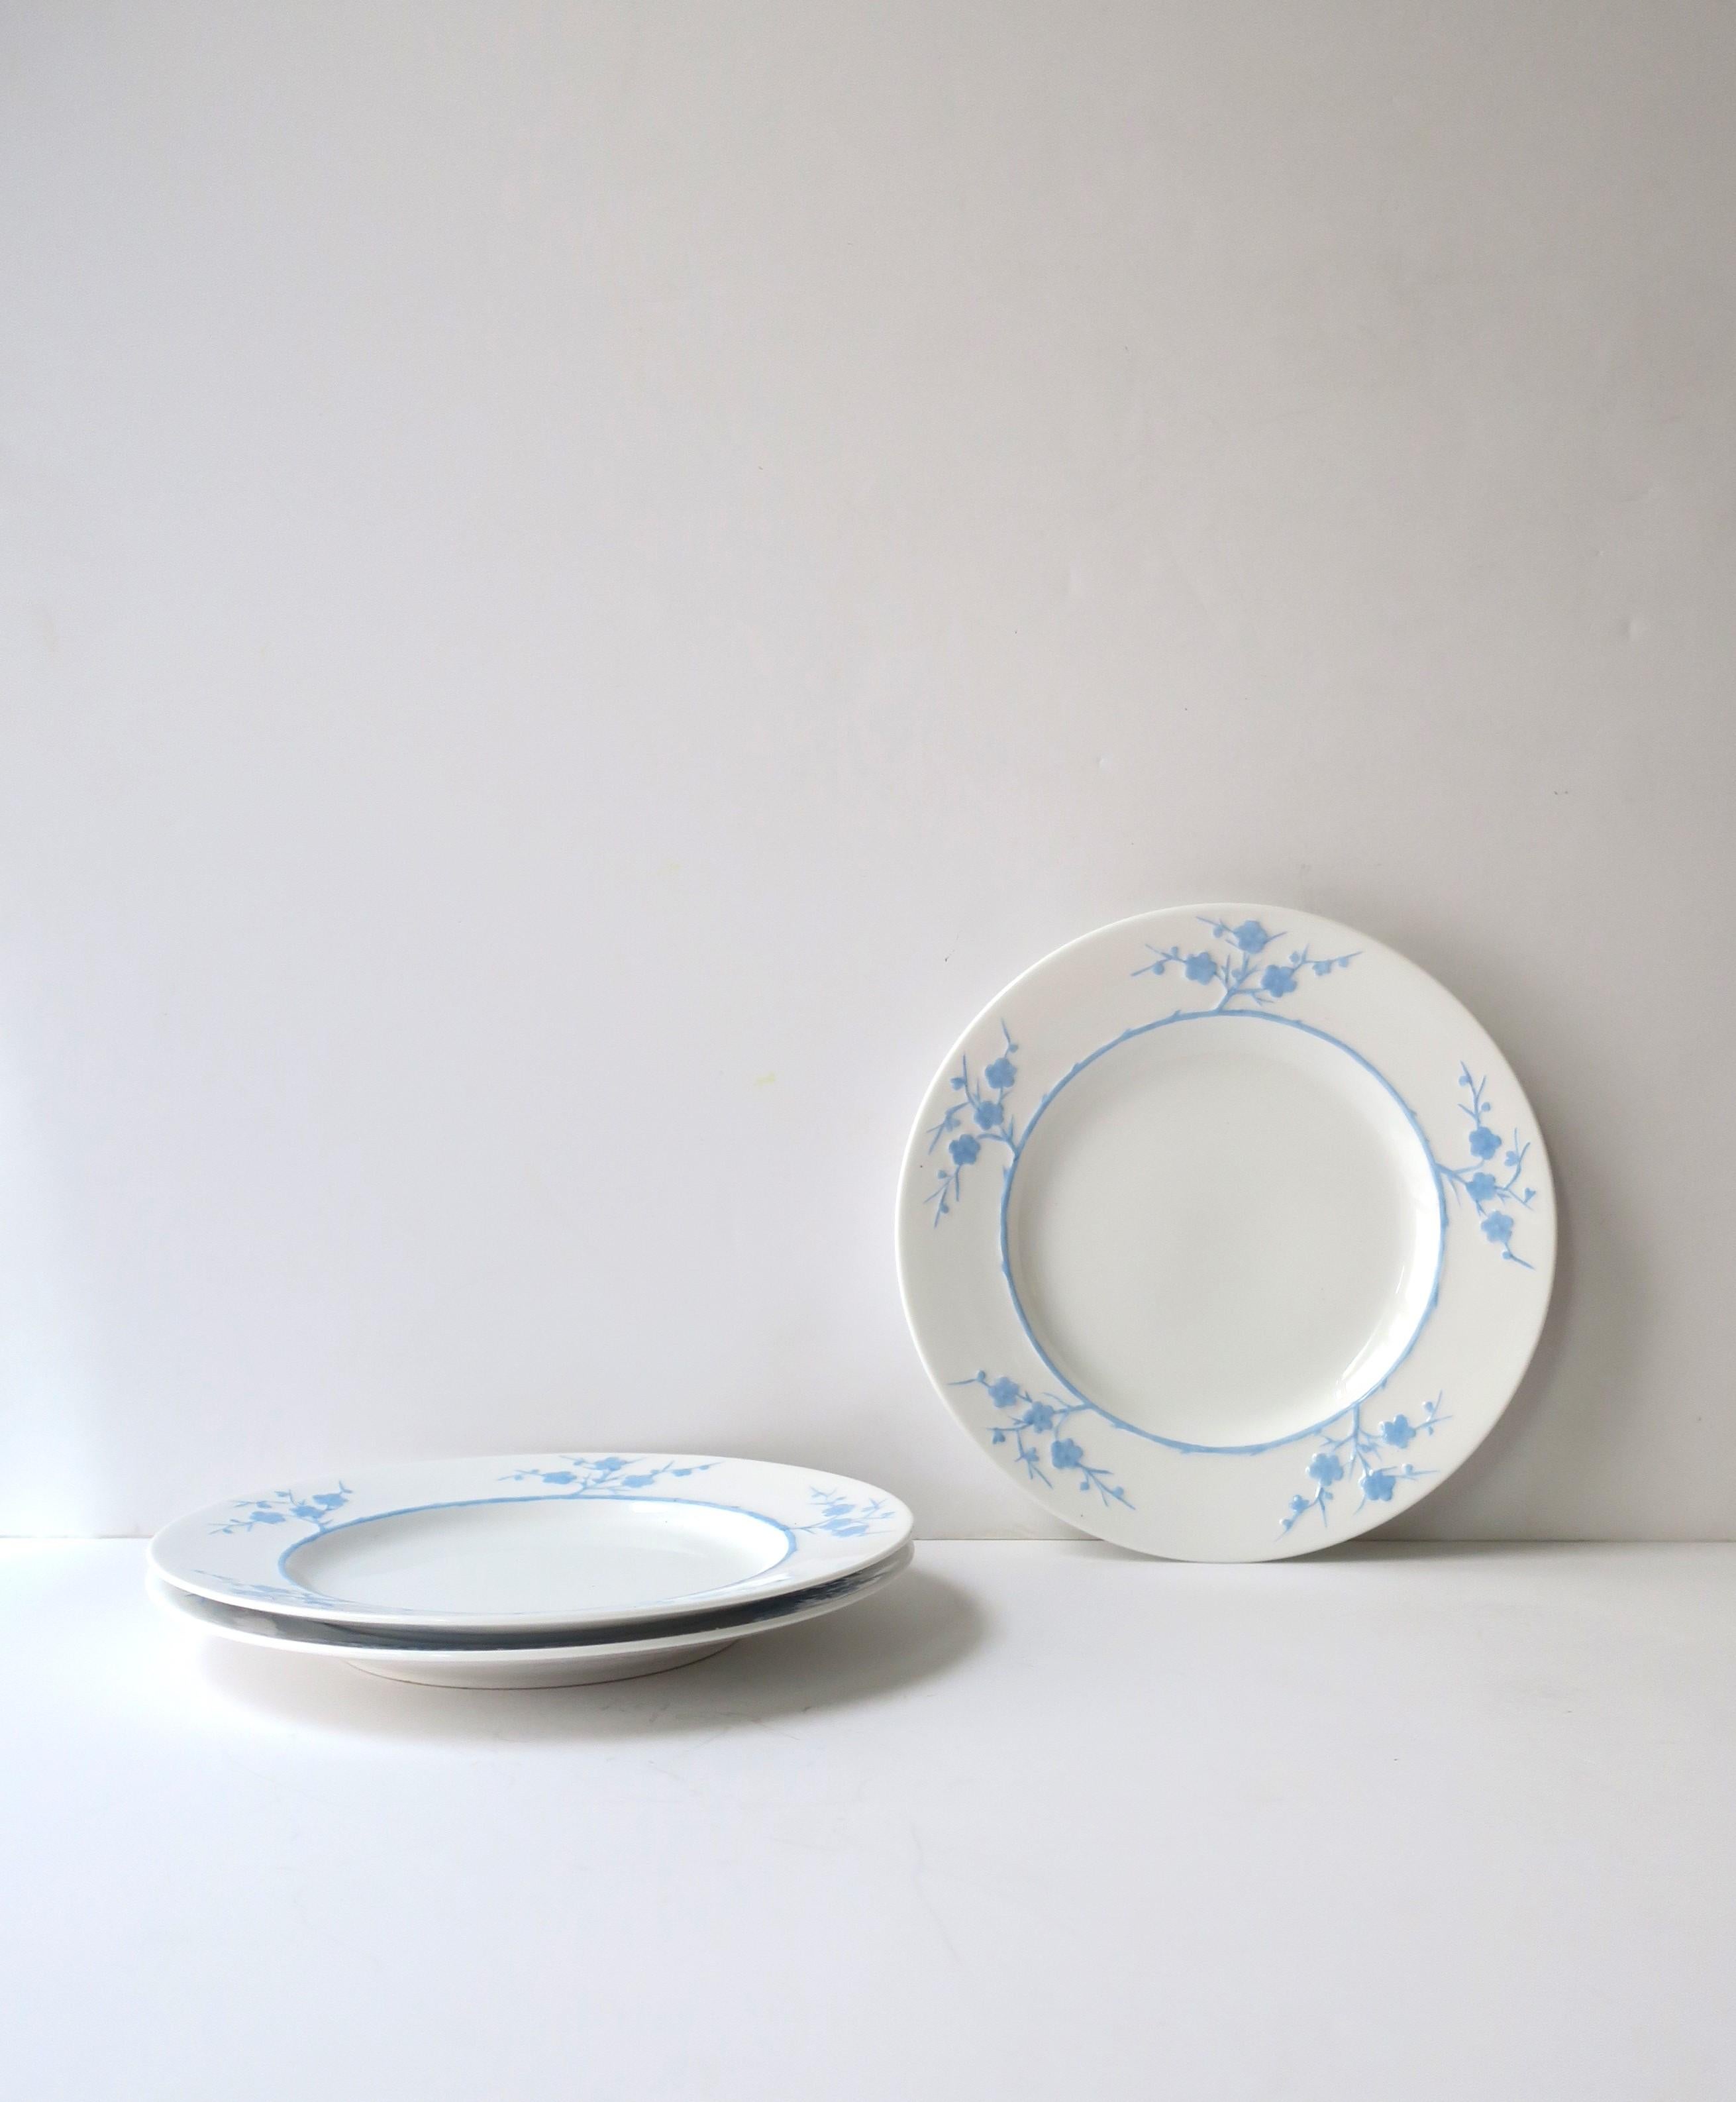 A beautiful set of three (3) Blanche de Chine white and light blue 'Geisha' porcelain plates by Spode Copelands, circa 20th century, England. With makers' mark and numbered on underside as shown in last two images. A great collectable set. Use for a